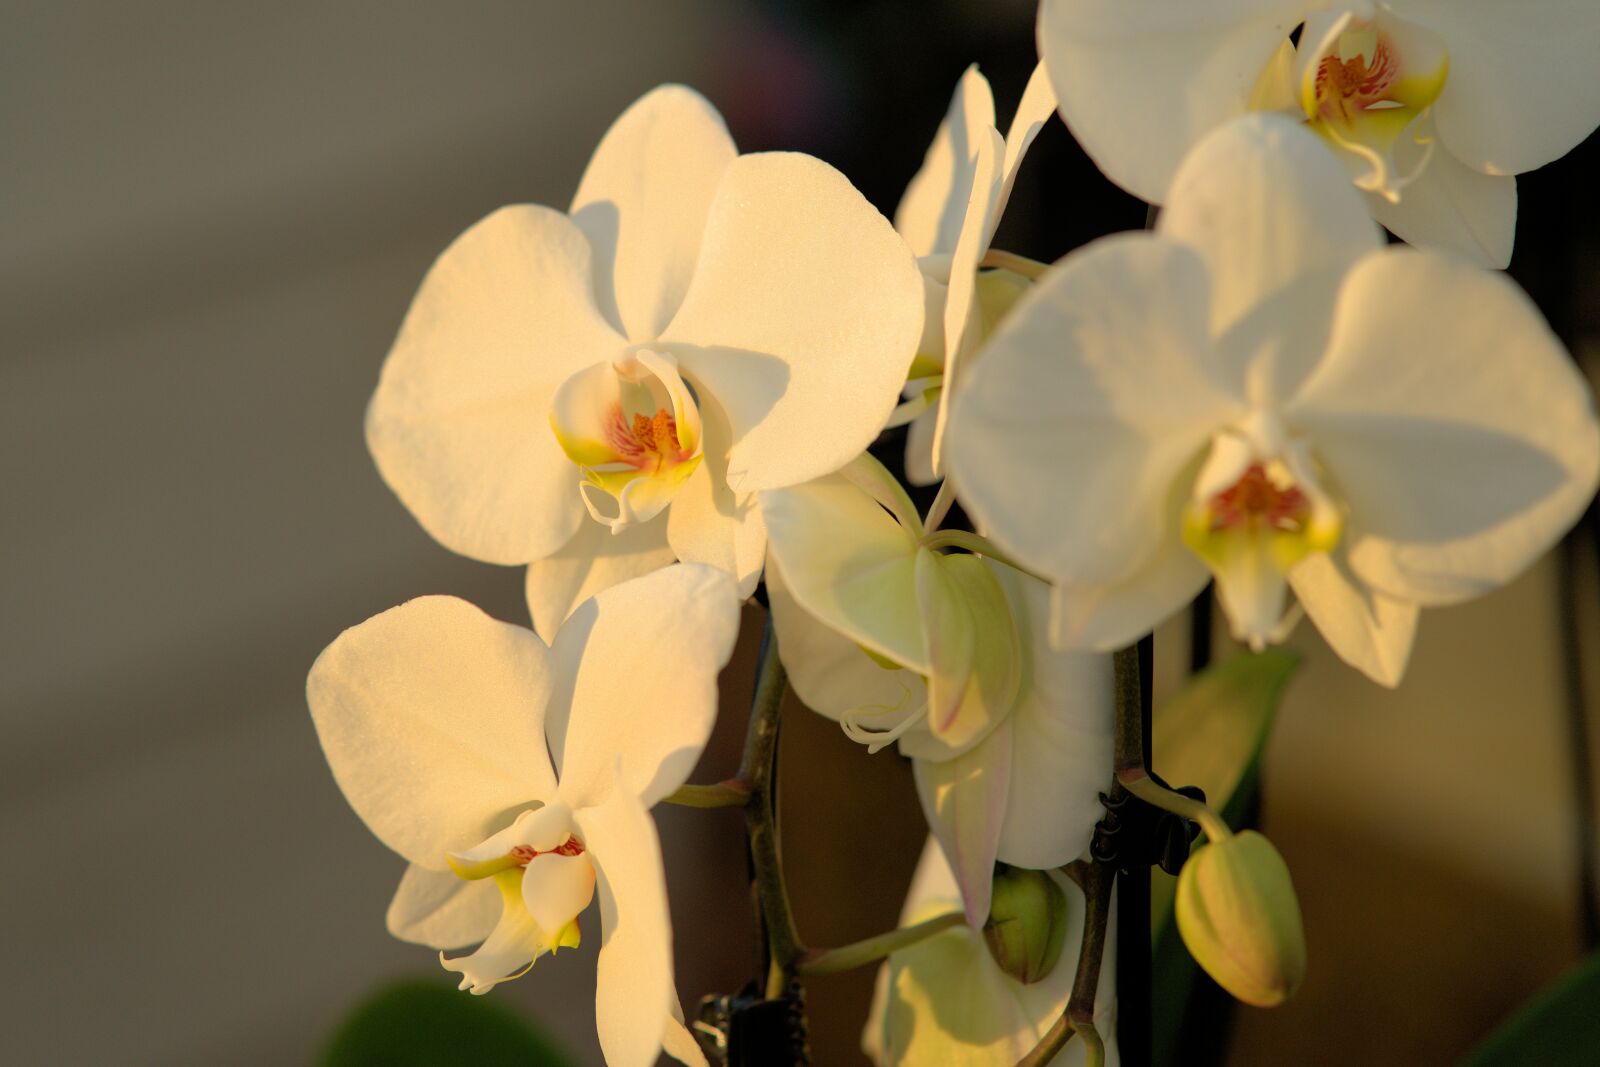 ZEISS Batis 85mm F1.8 sample photo. Orchid, flower, blossom photography